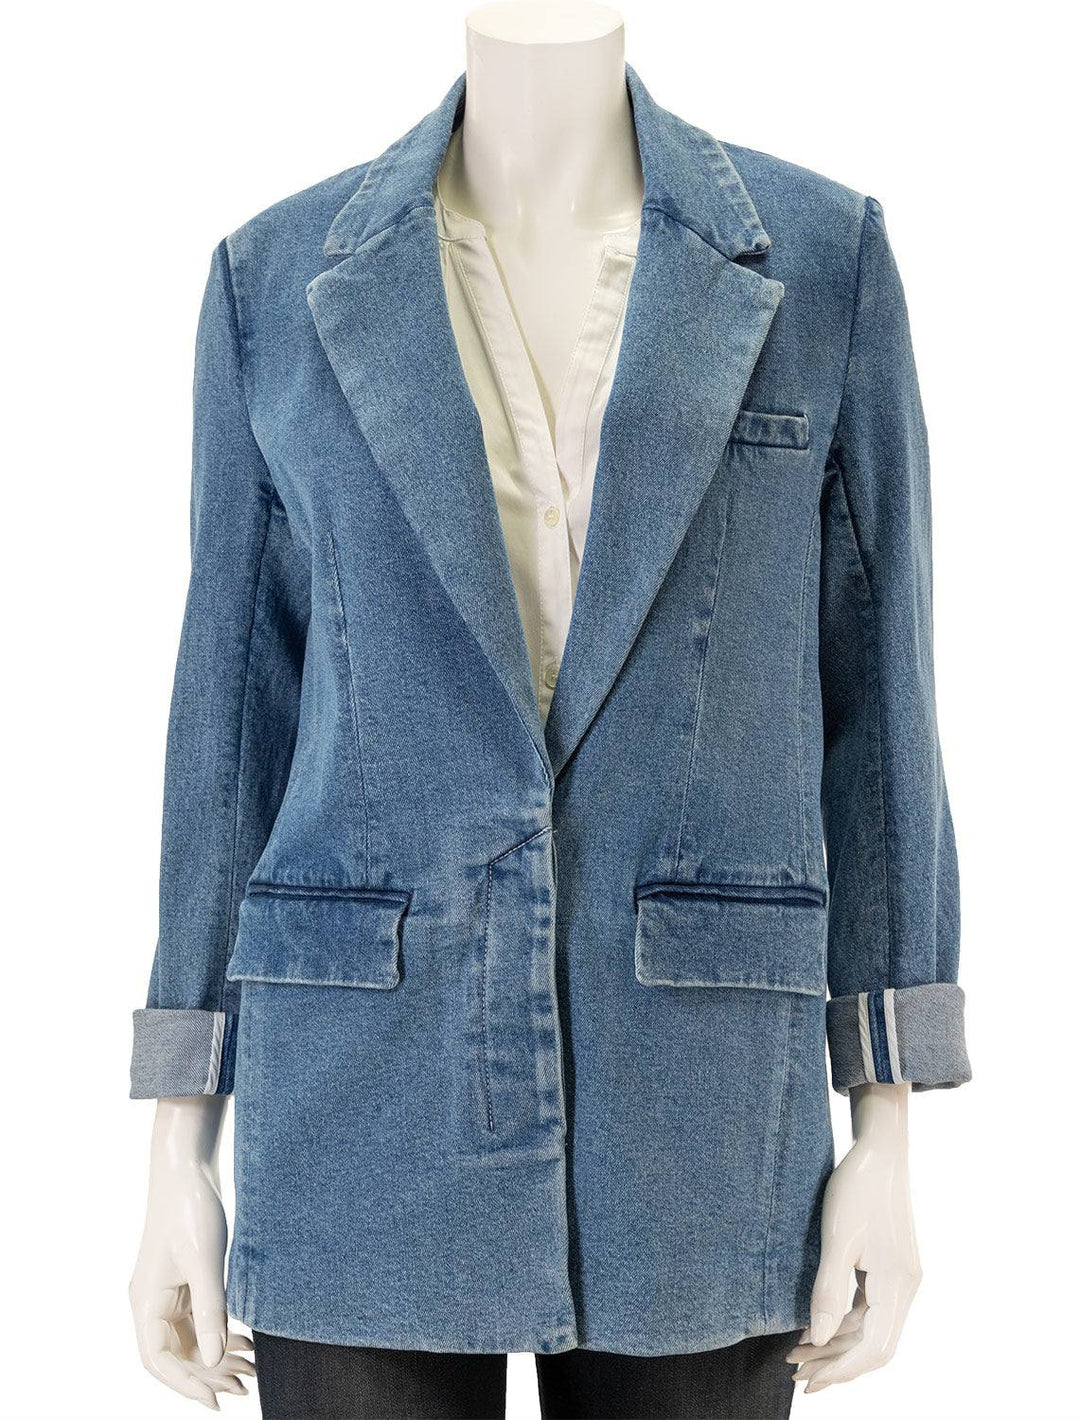 Front view of STAUD's maxwell blazer in medium wash, buttoned.